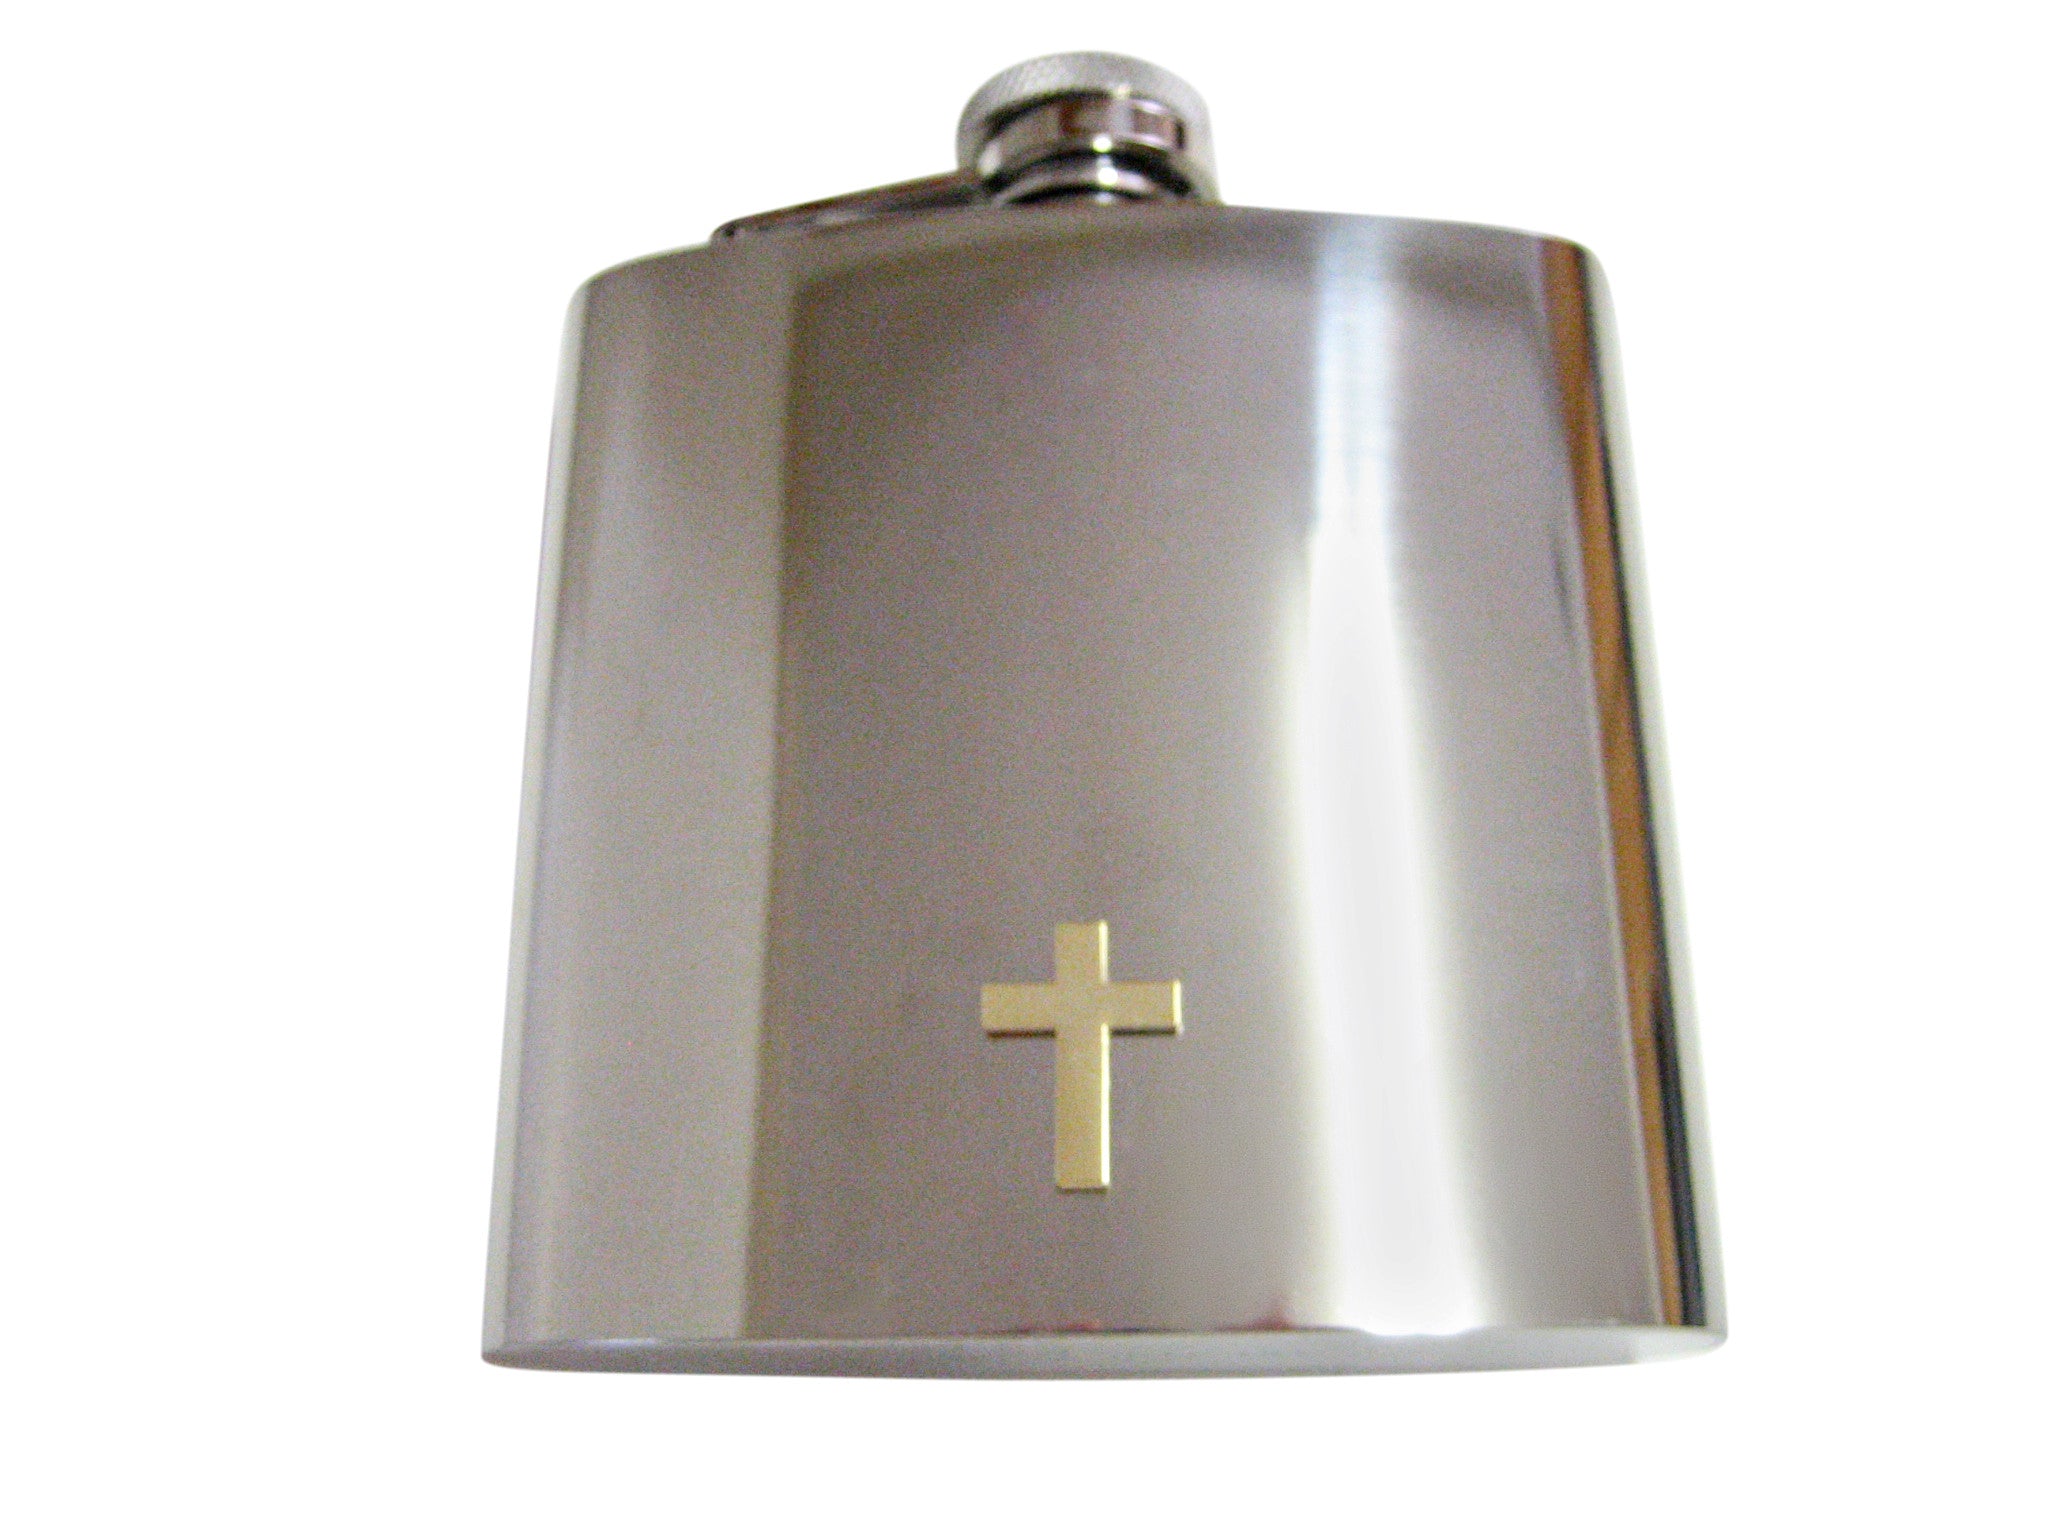 Gold Toned Classic Religious Cross 6 Oz. Stainless Steel Flask